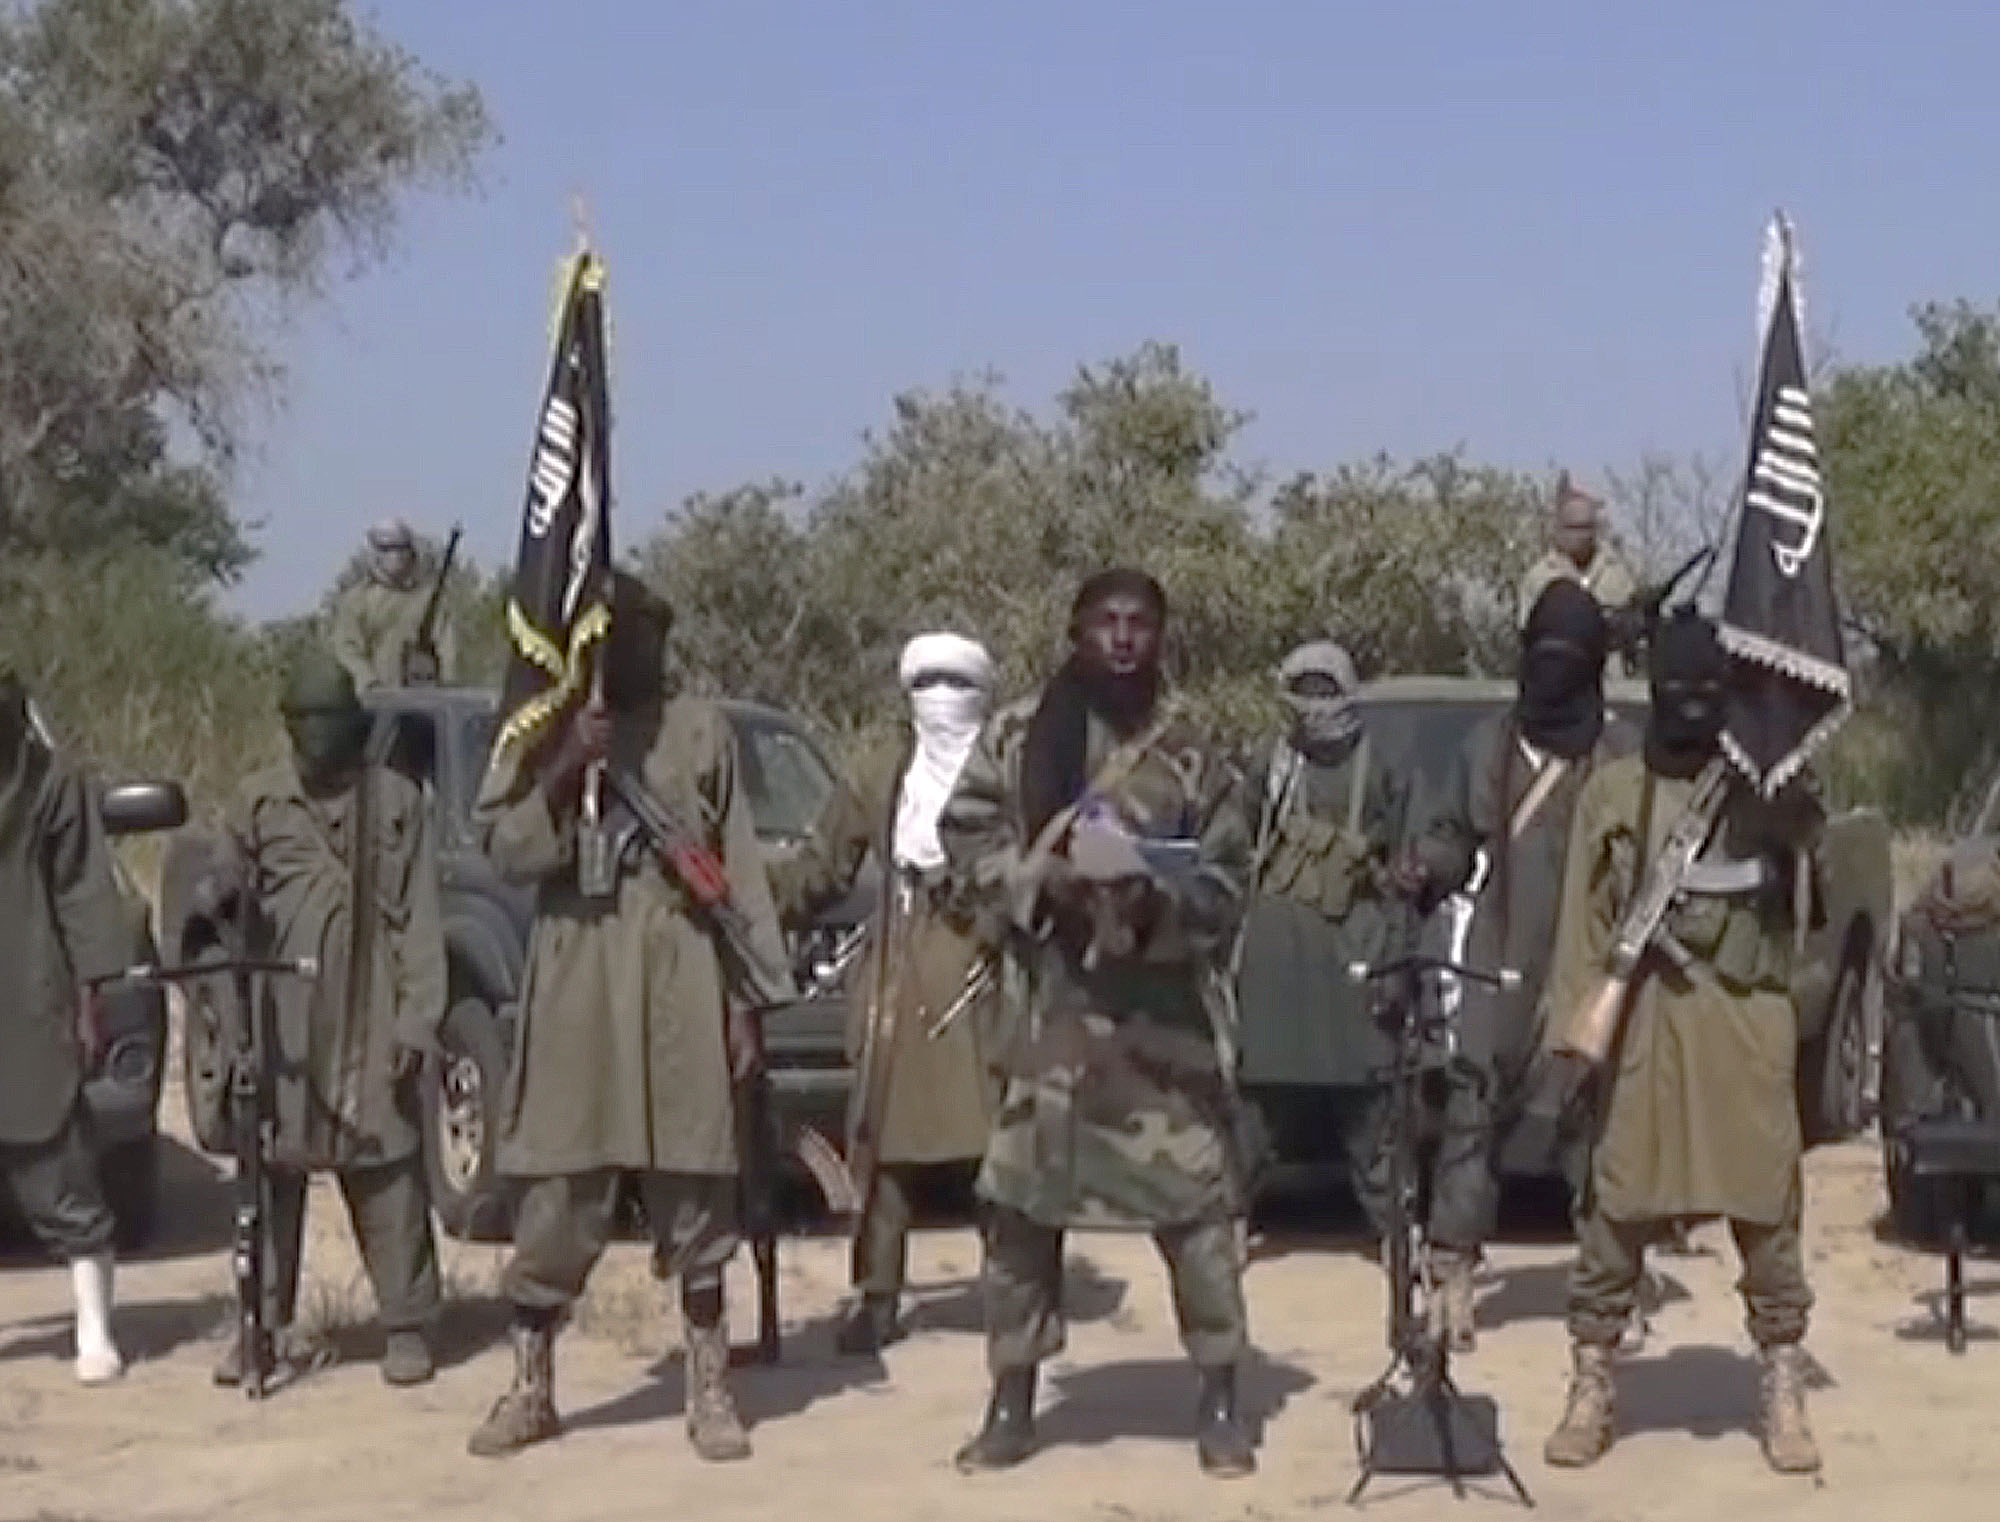 Image taken from a video by Nigeria's Boko Haram terrorist network, Oct. 31, 2014.